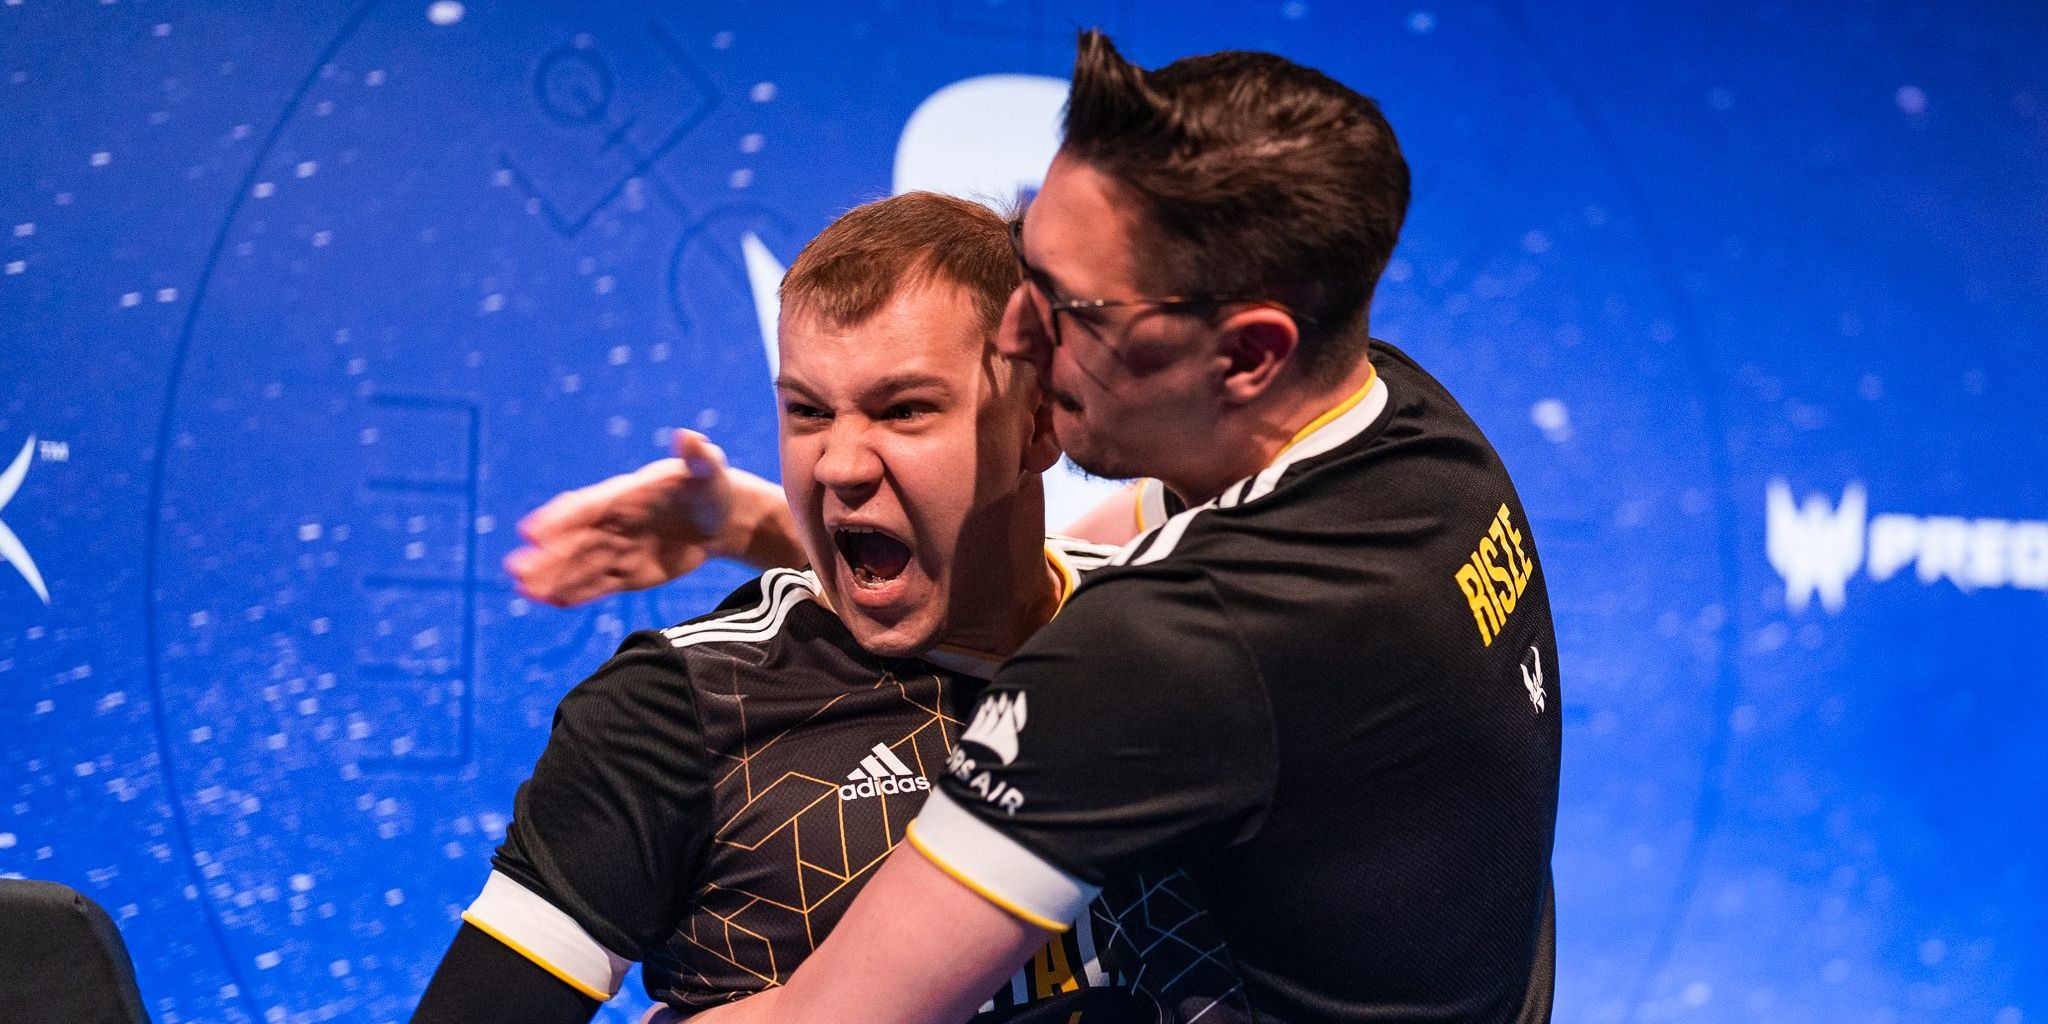 "Stage beast" BiBooAF vital to Team Vitality's Sweden Major campaign, say risze and Lyloun